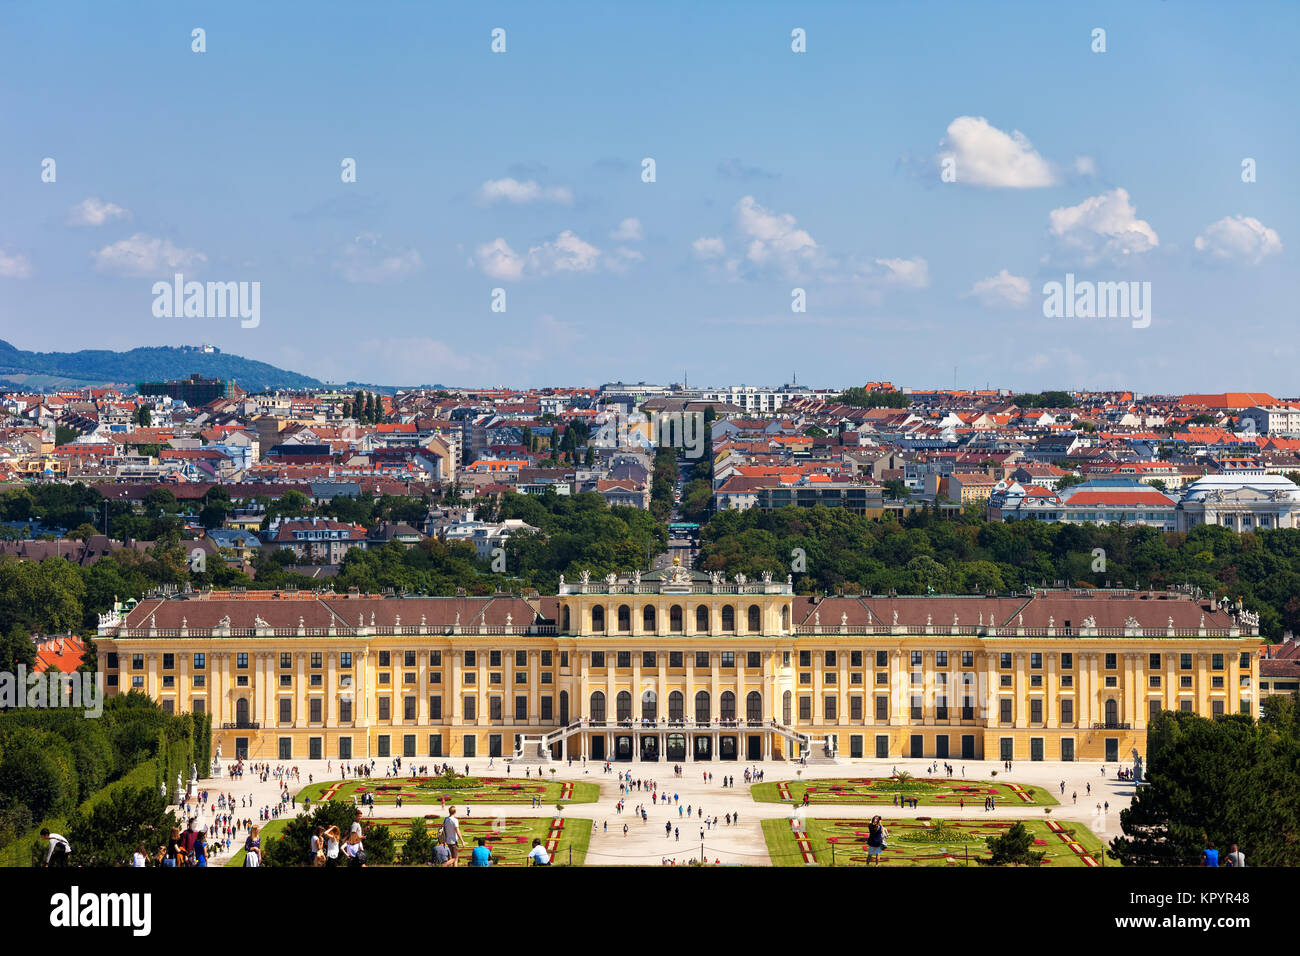 Schonbrunn Palace, imperial summer residence Baroque style architecture, city of Vienna cityscape, Austria, Europe Stock Photo